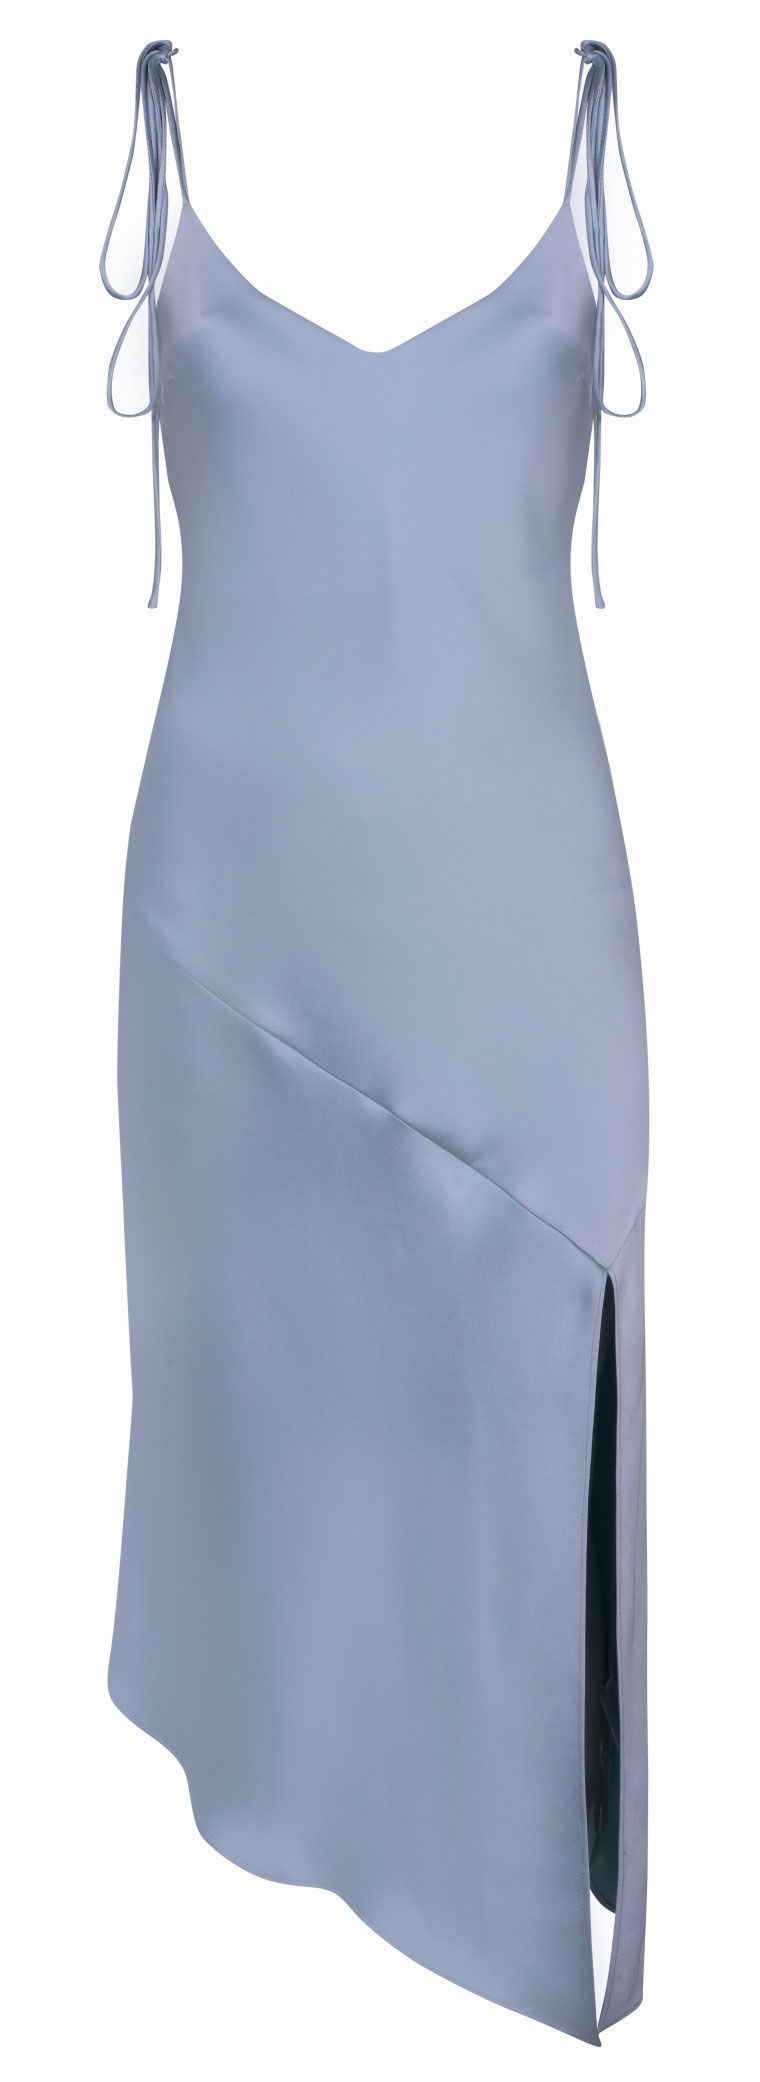 White, Neck, Black, Grey, Waist, Electric blue, One-piece garment, Day dress, Synthetic rubber, Silver, 